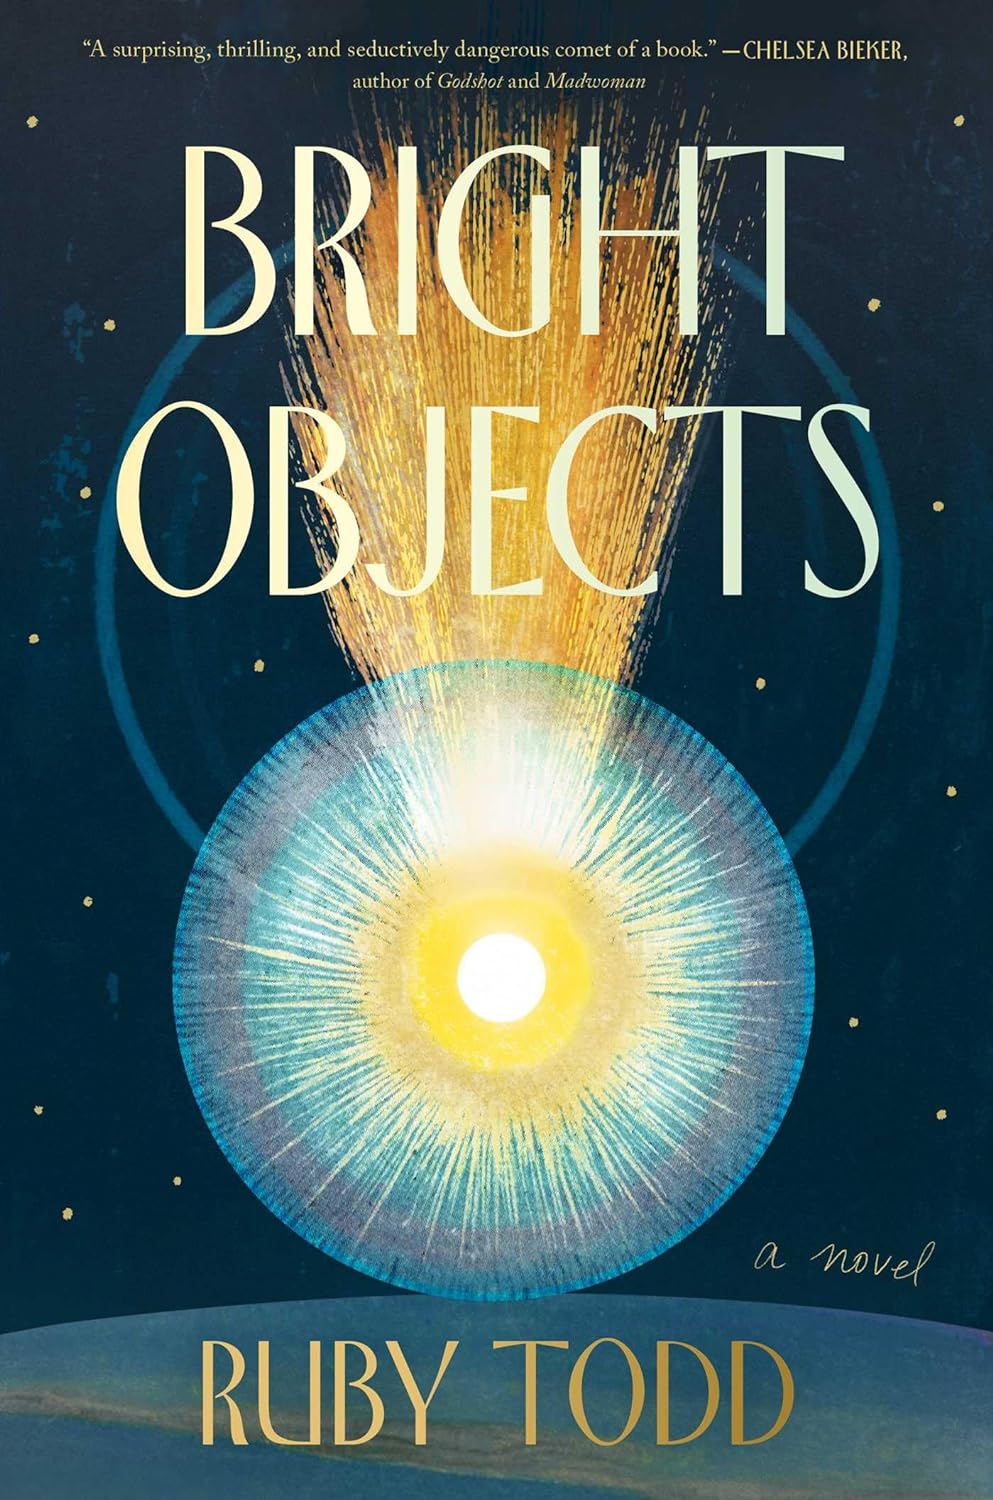 Image for "Bright Objects"